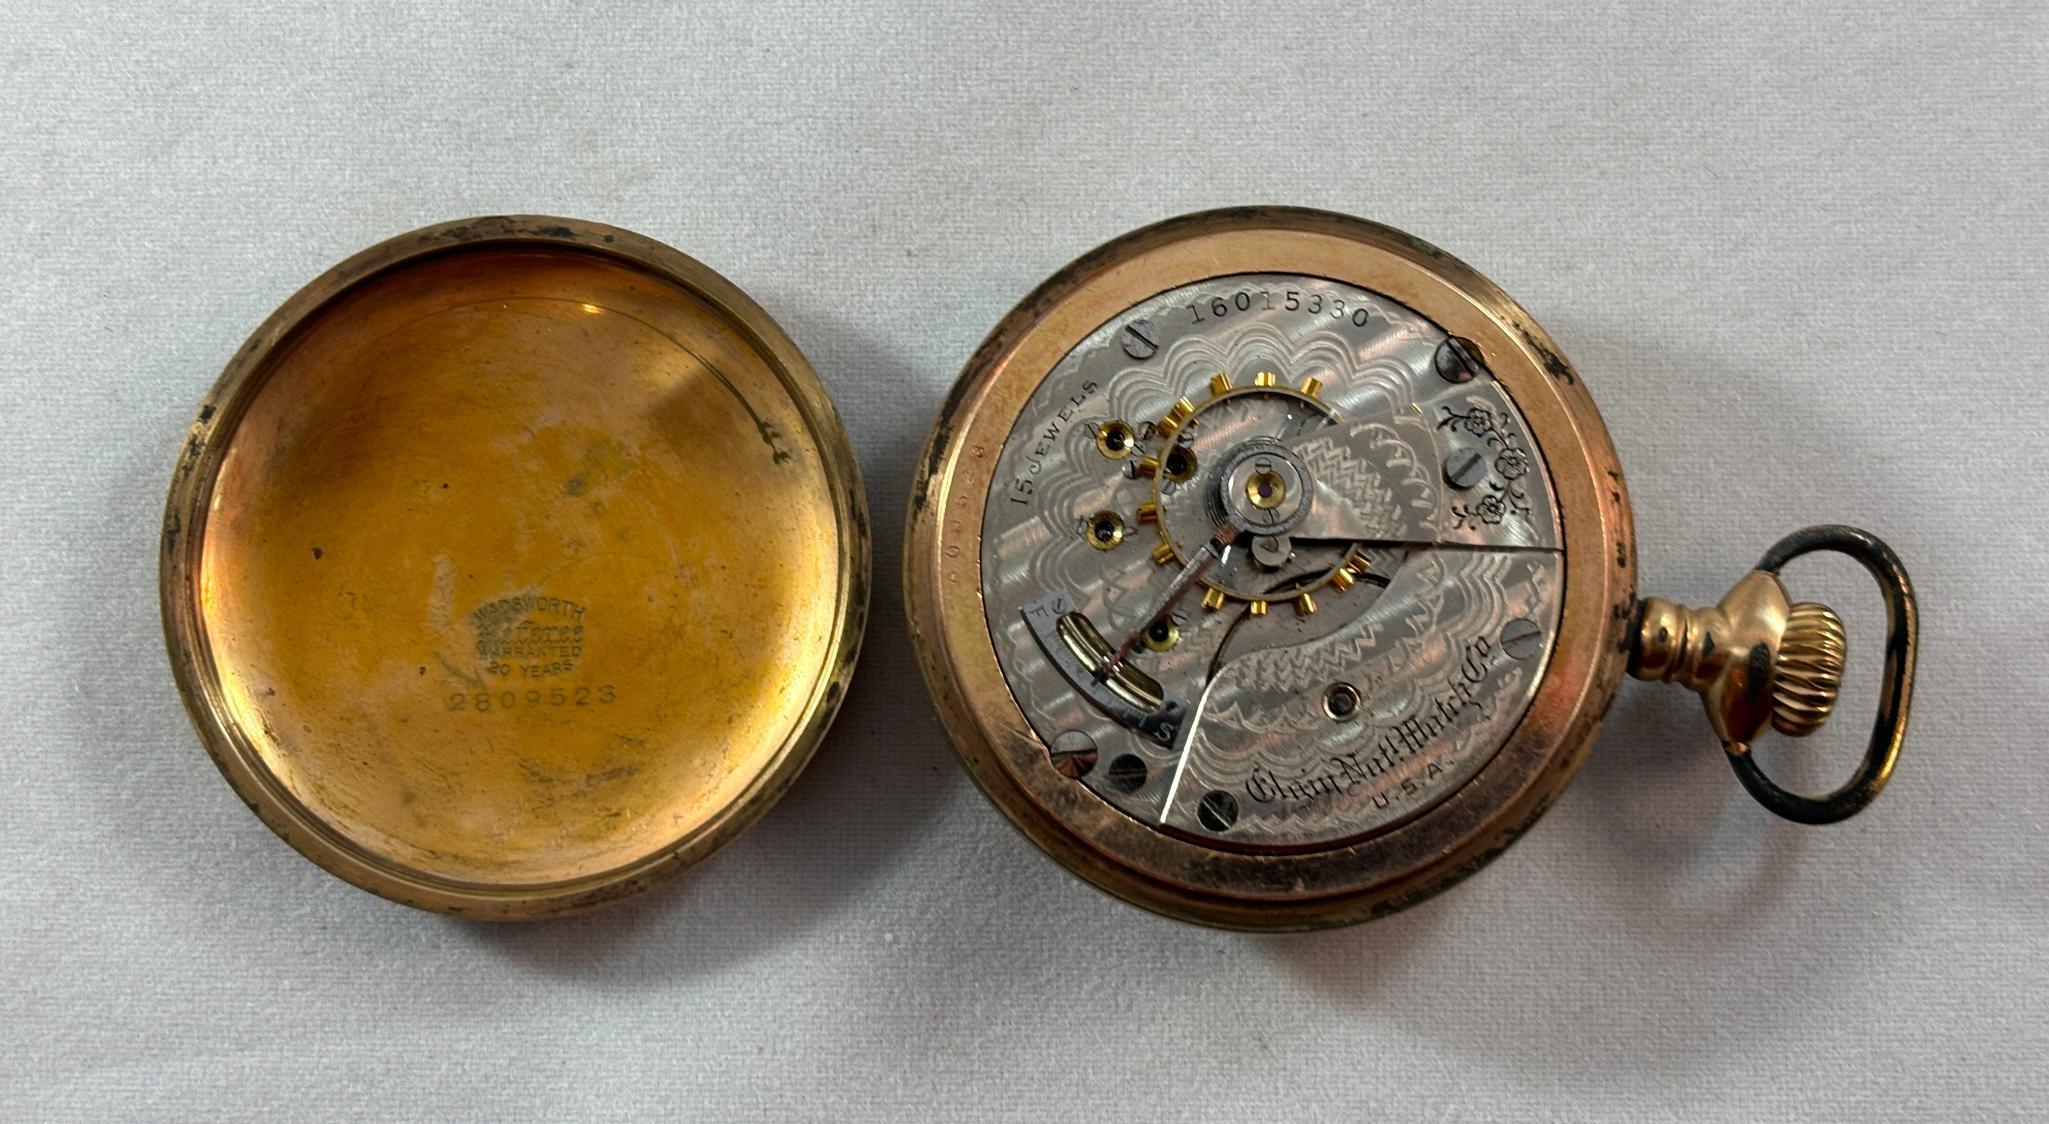 Two Gold Filled Pocket Watches 18 size Dueber Grand 18 Size Elgin